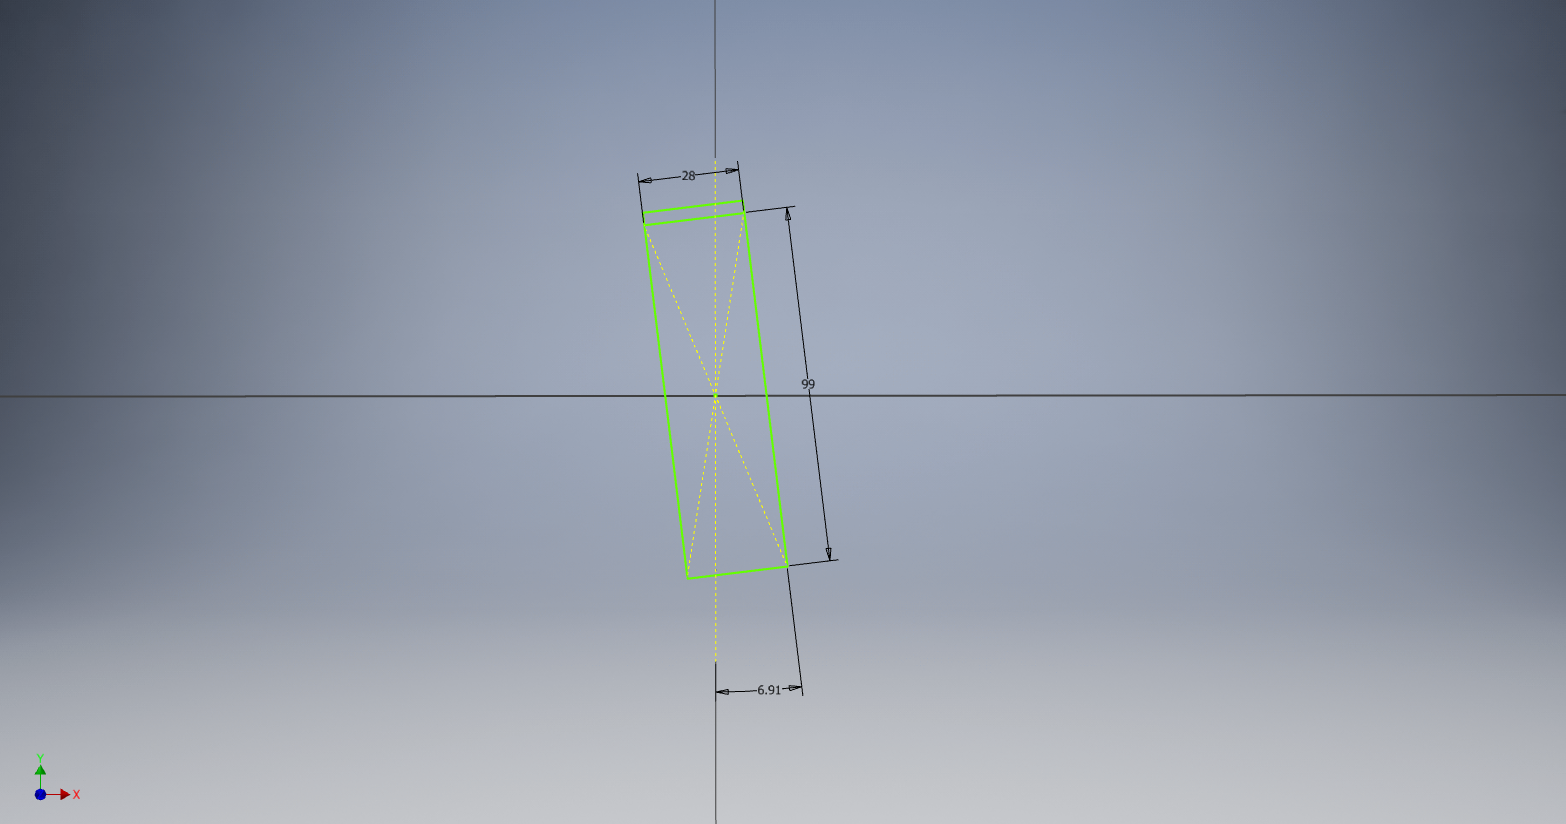 Rotated projection by the maximum deflection